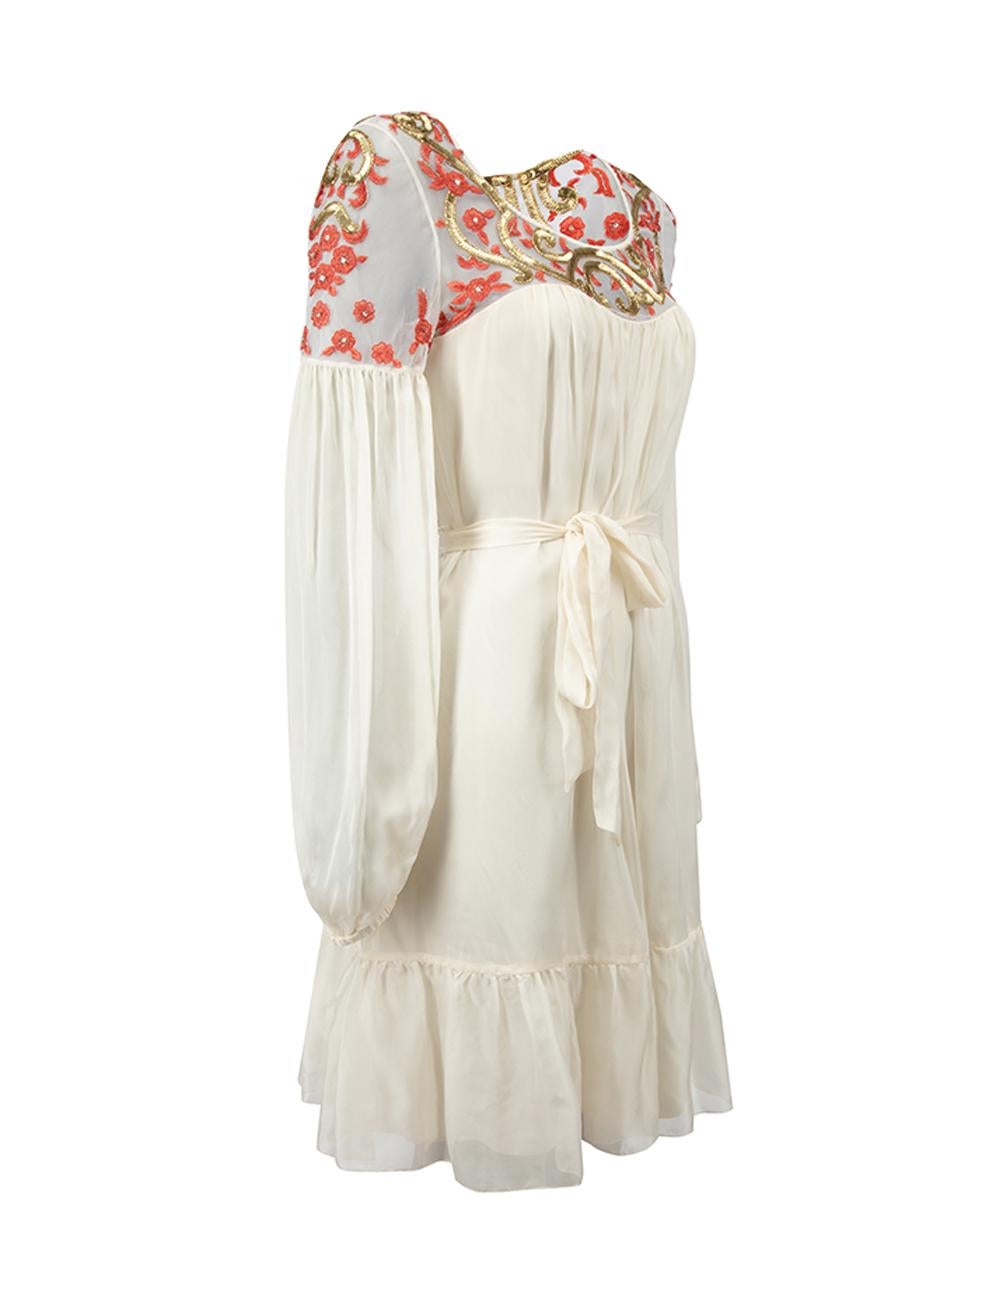 CONDITION is Never worn, with tags. No visible wear to dress is evident on this new Temperley London designer resale item. 



Details


Cream

Silk

Mini dress

Round neckline

Floral embroidery with sequins accent

Elasticated